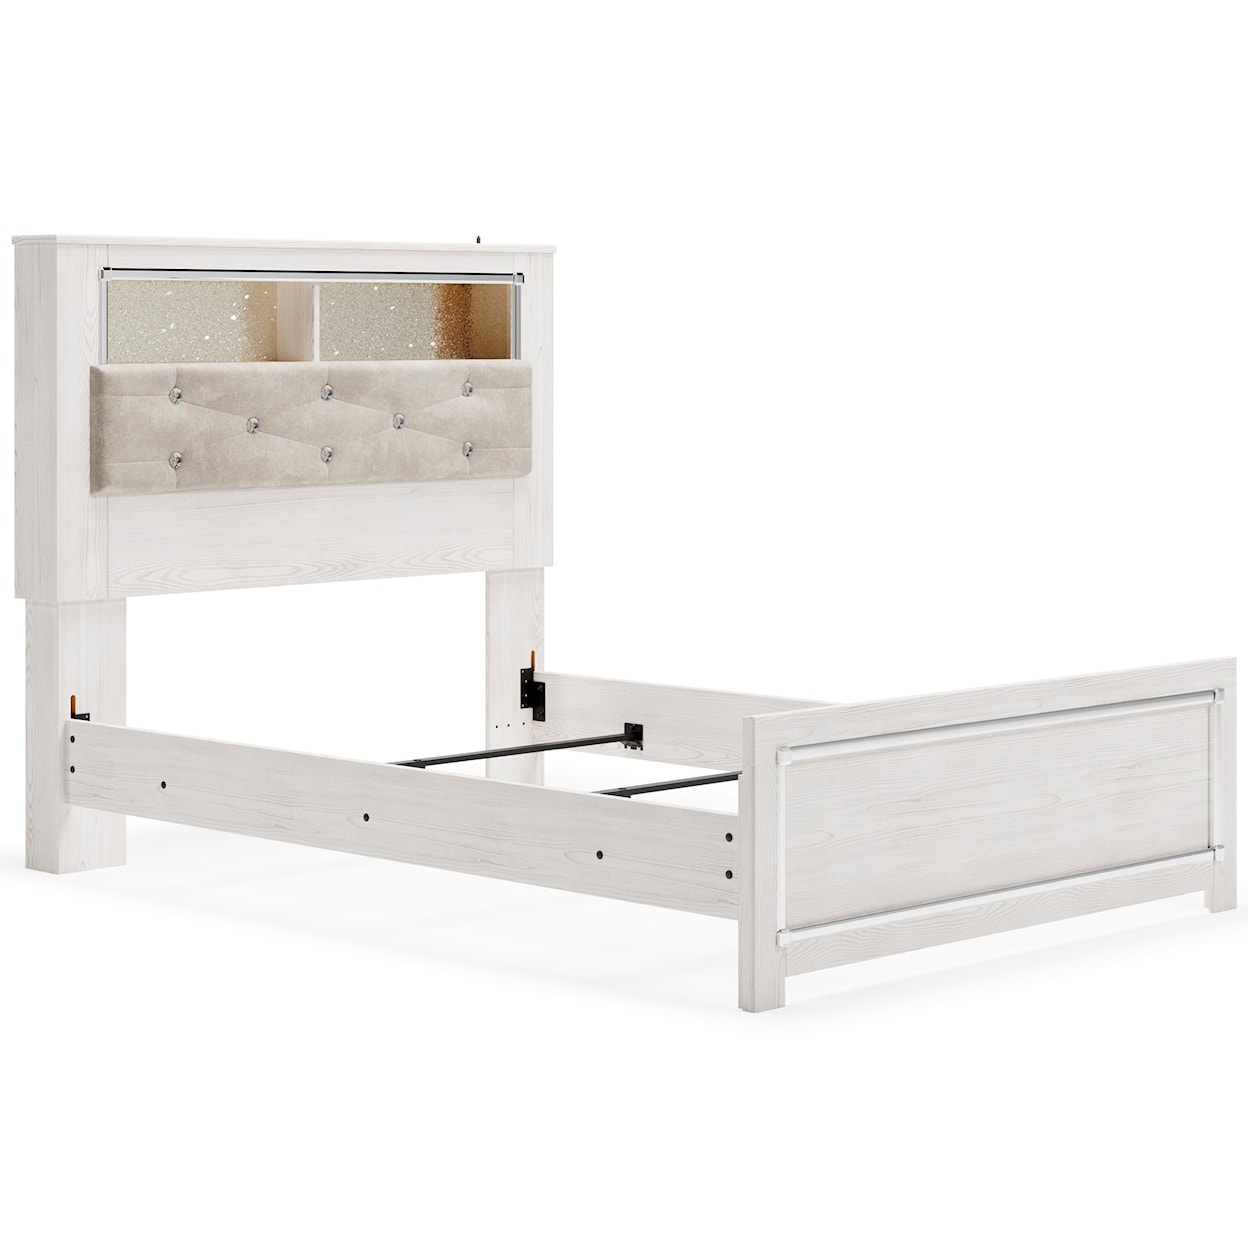 Ashley Furniture Signature Design Altyra Full Upholstered Bookcase Bed